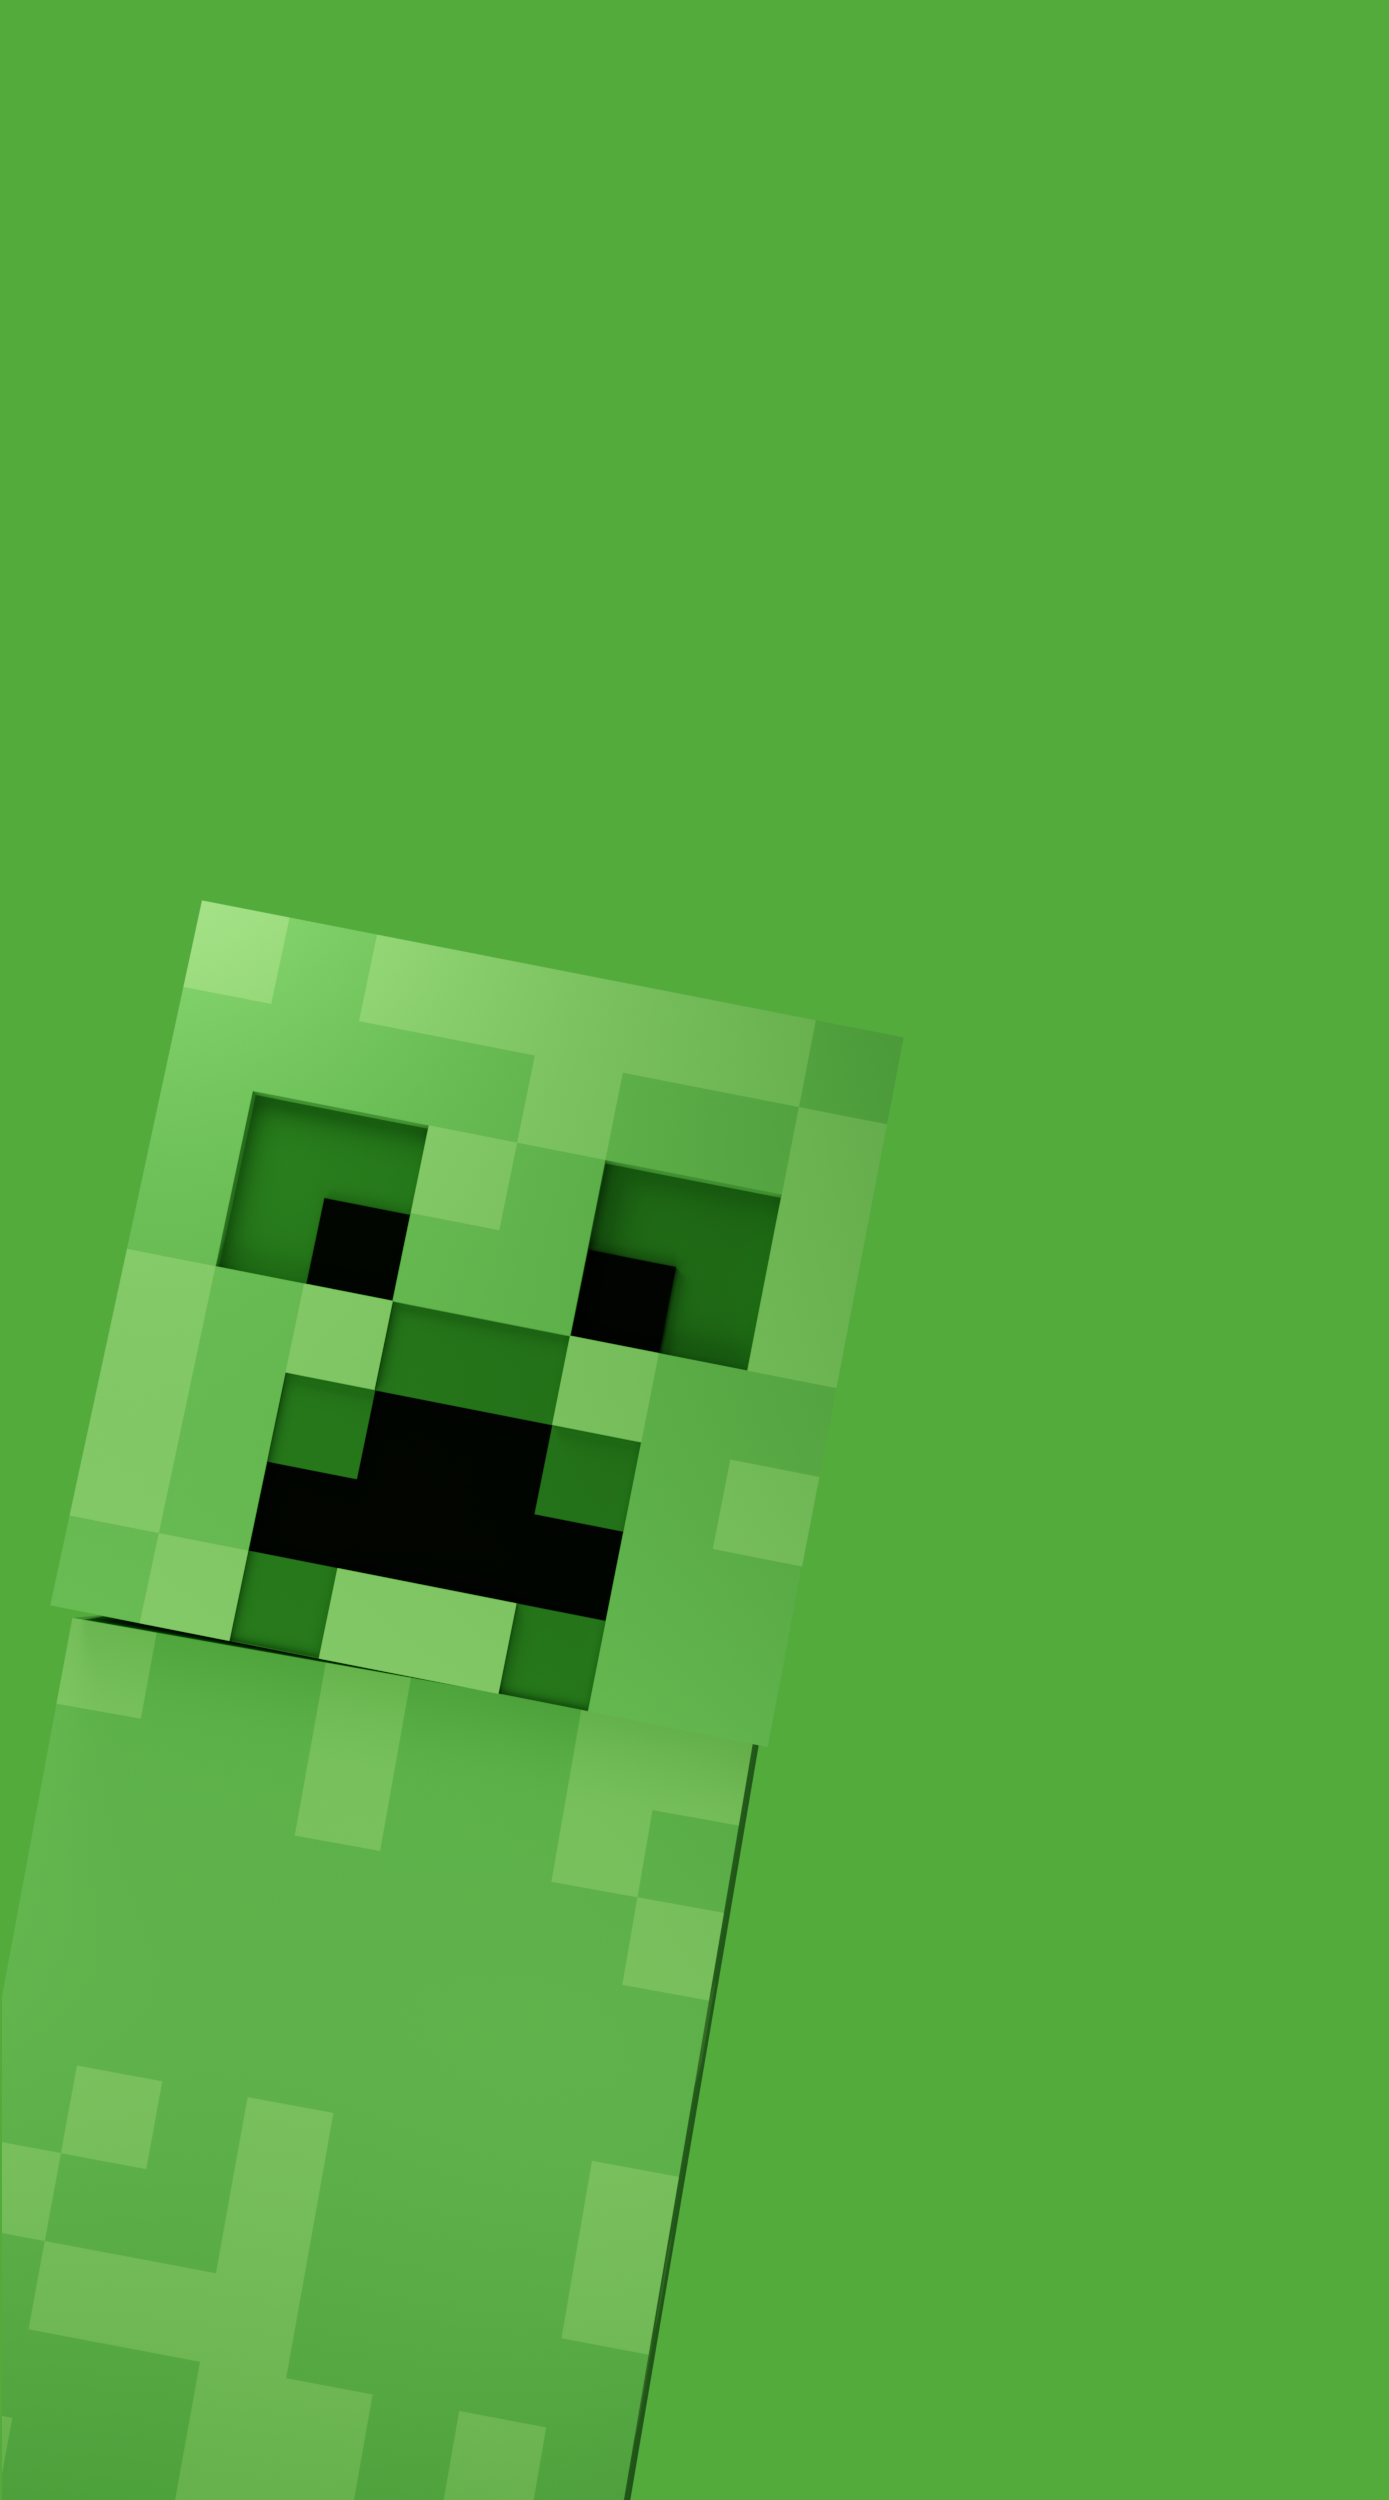 A Simple Mobile Wallpaper Of Creeper Minecraft